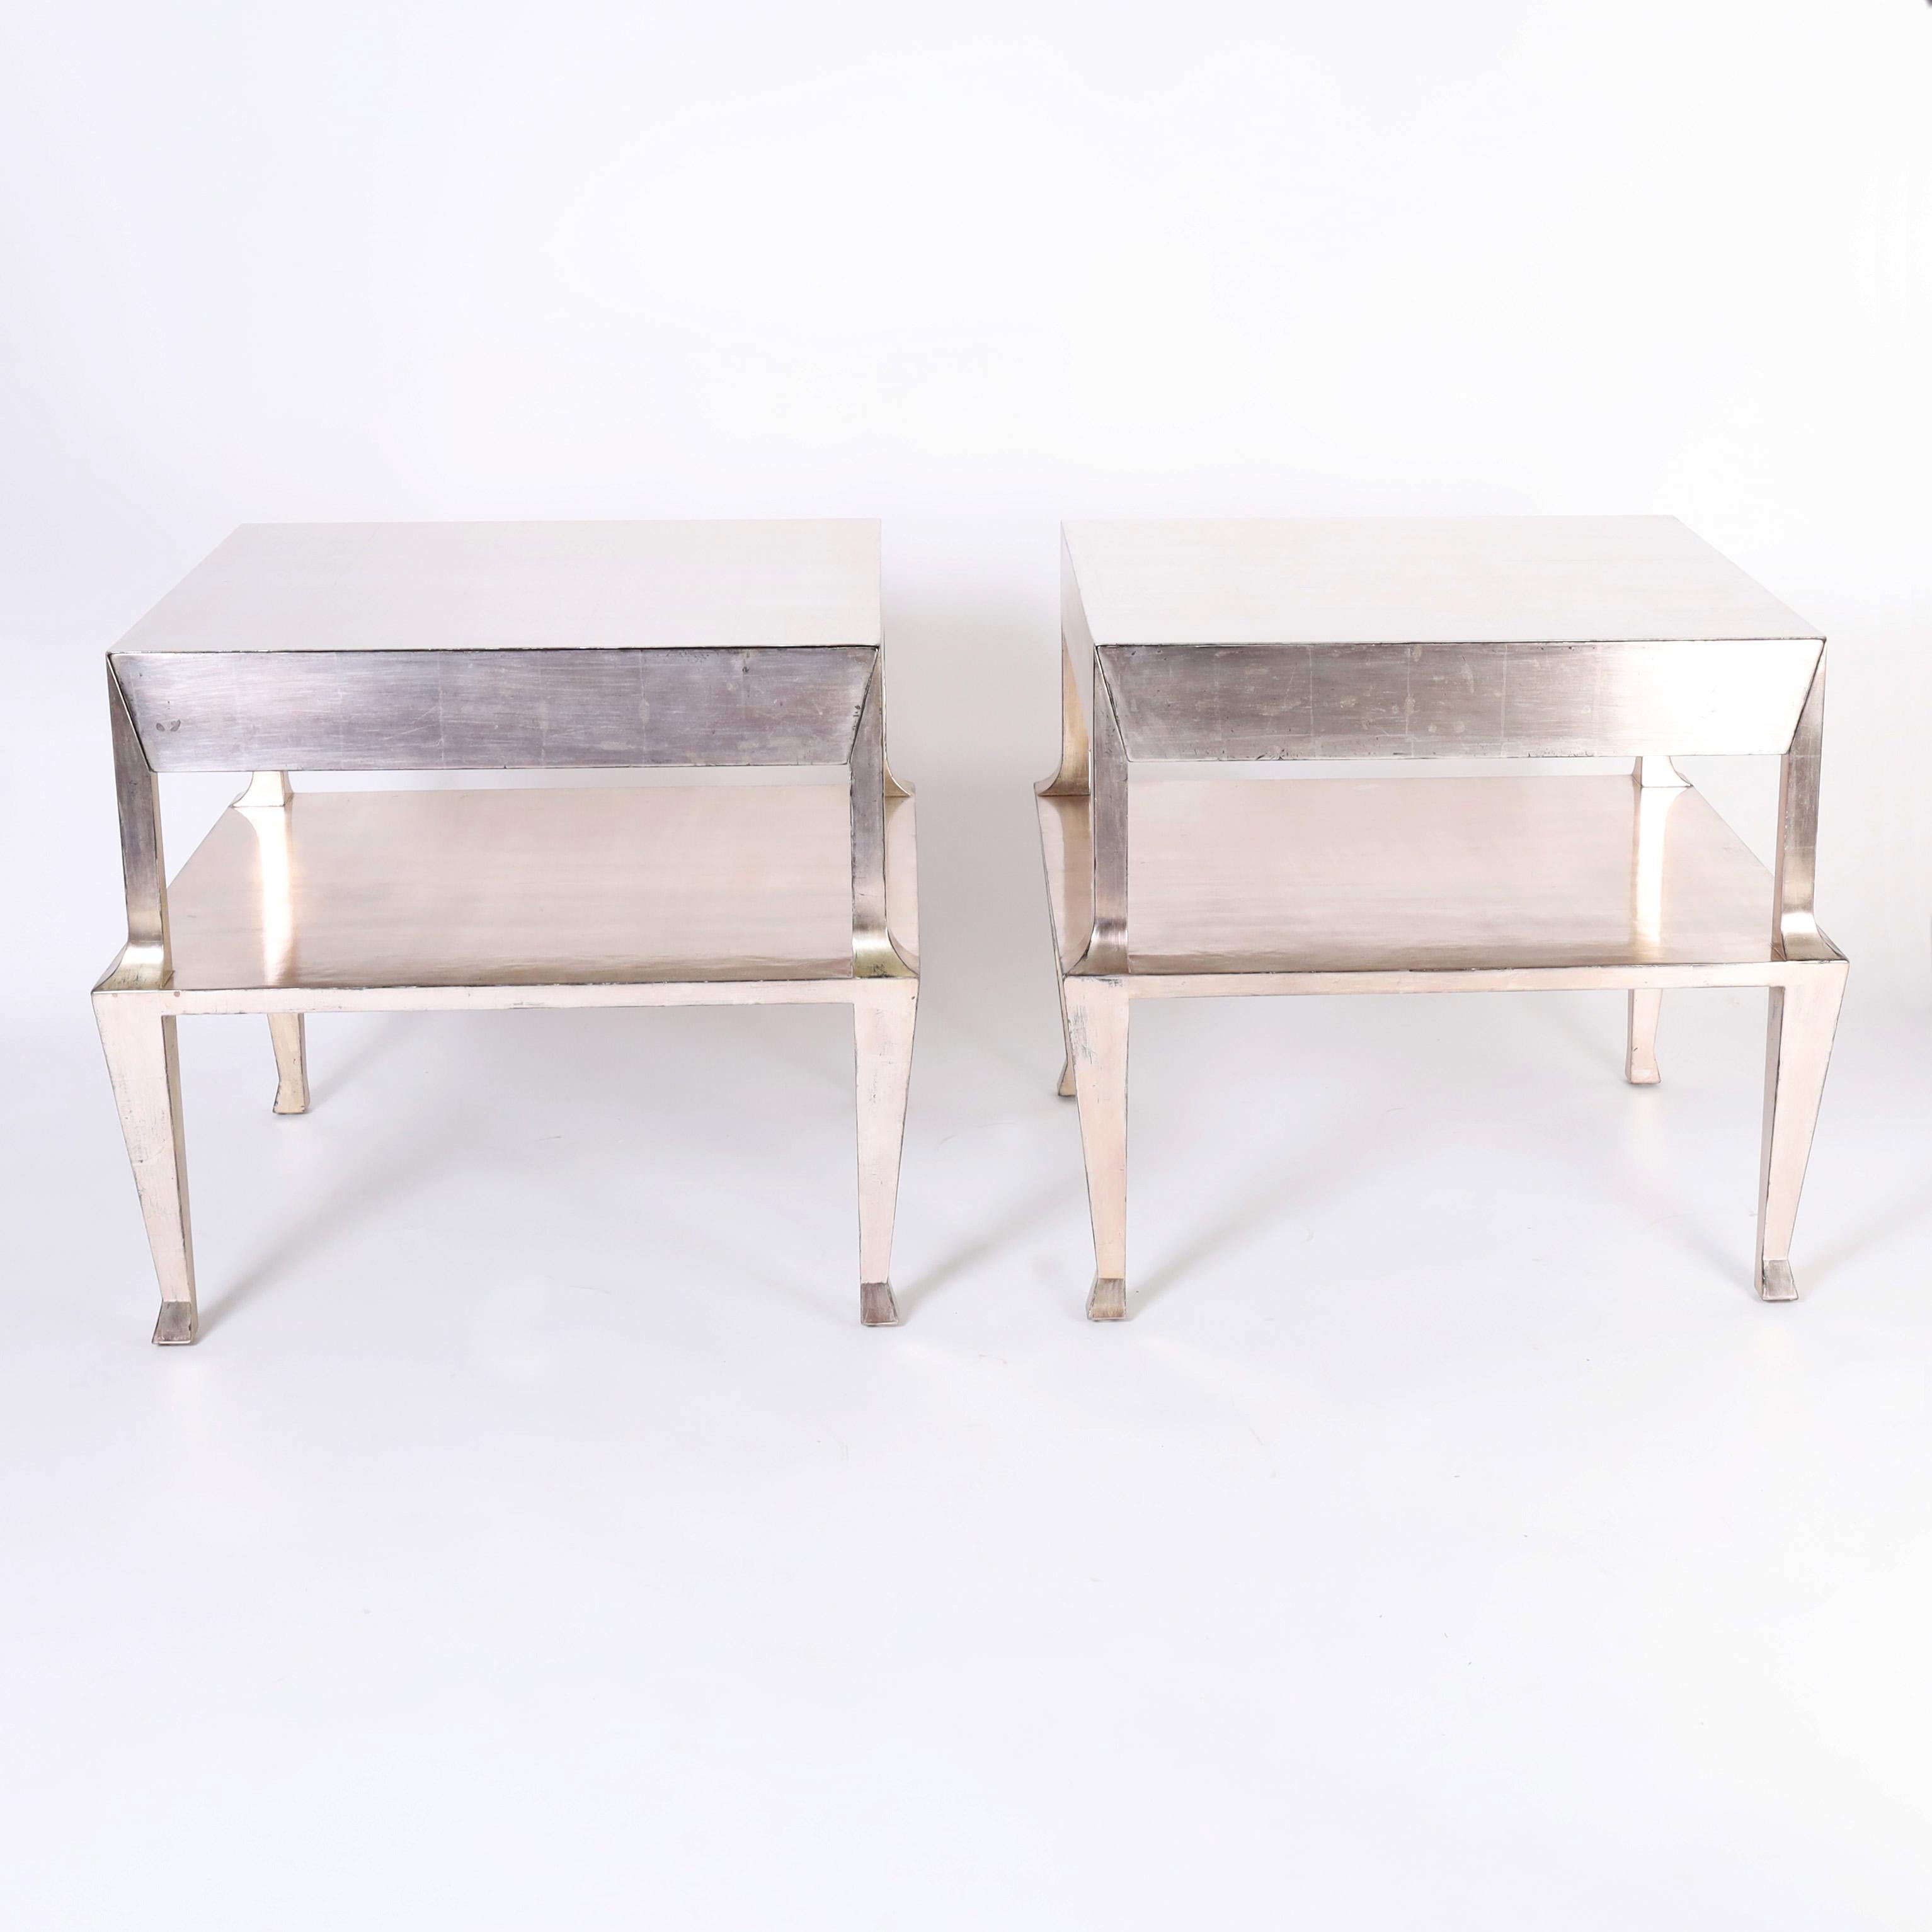 Chic pair of mid century stands crafted in hardwood with one drawer, having a silver leaf finish over a modern neoclassic form. Manufactured by Therien Studio Workshops. 